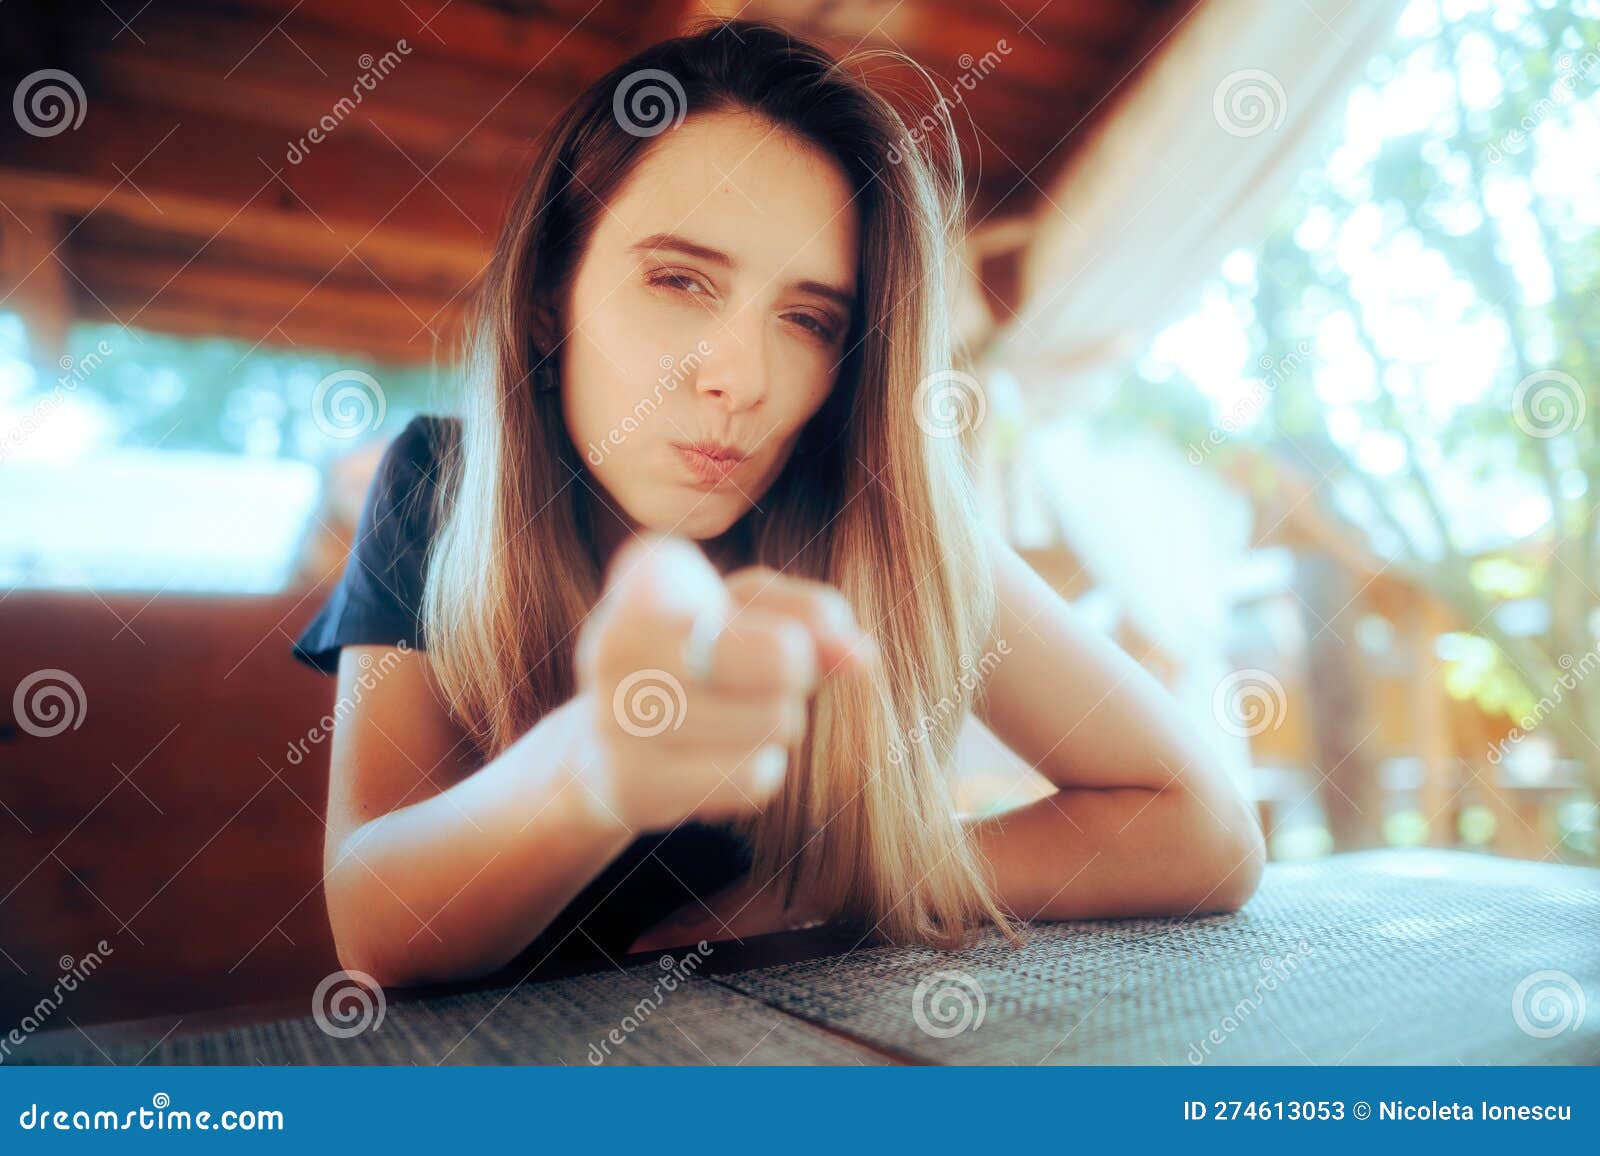 Funny Woman Pointing To the Camera Finding the Culprit Stock Image